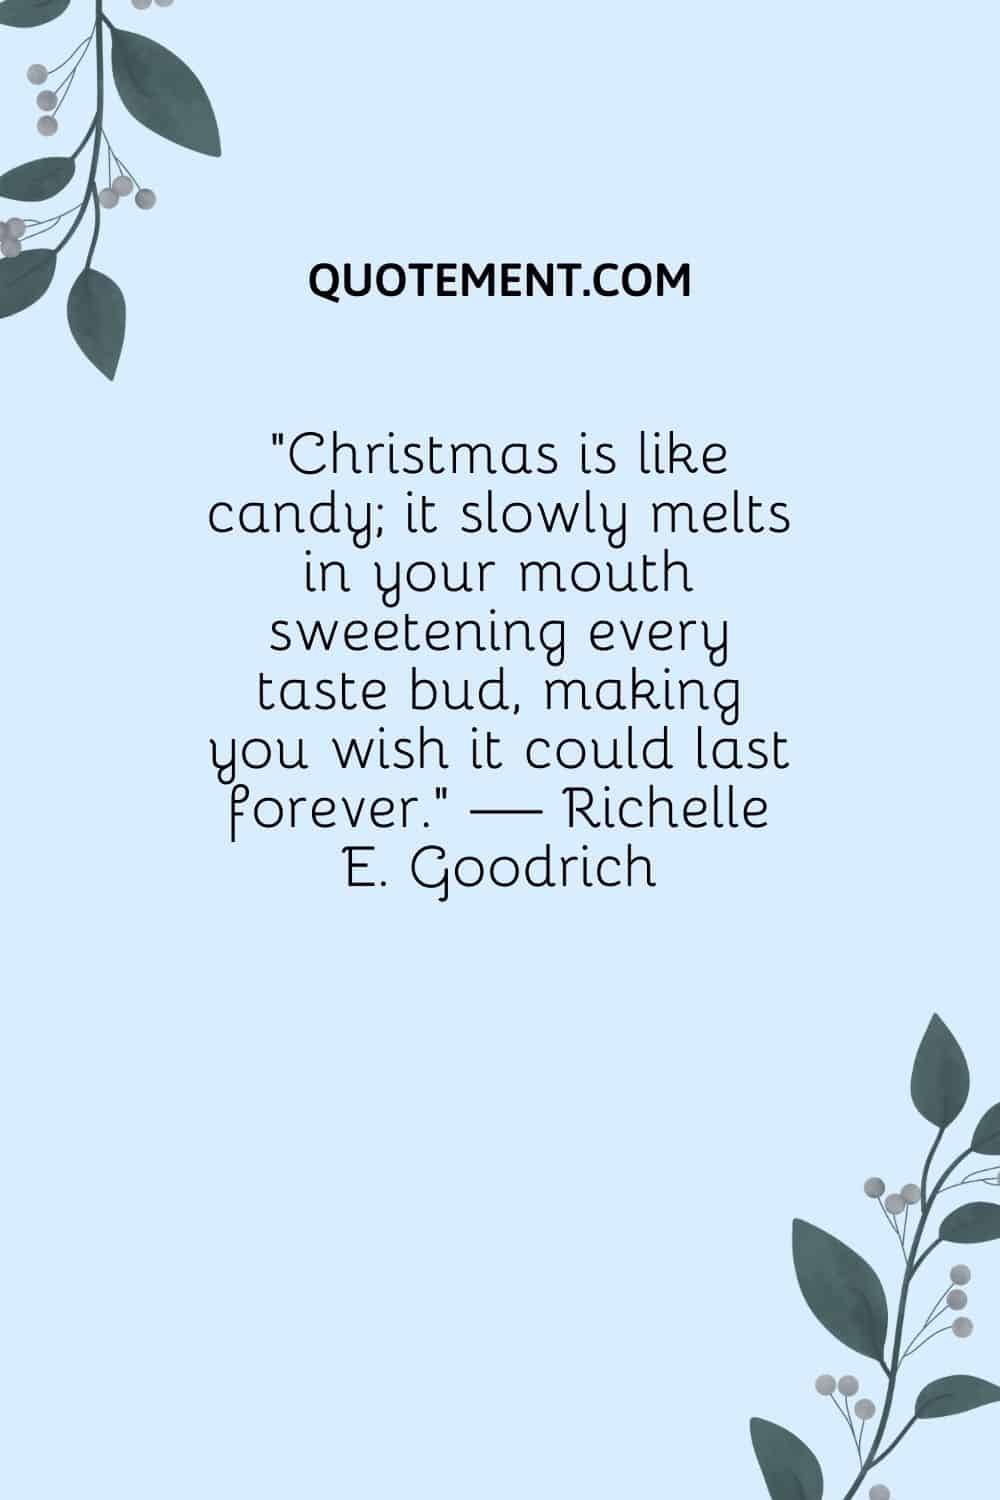 “Christmas is like candy; it slowly melts in your mouth sweetening every taste bud, making you wish it could last forever.” — Richelle E. Goodrich